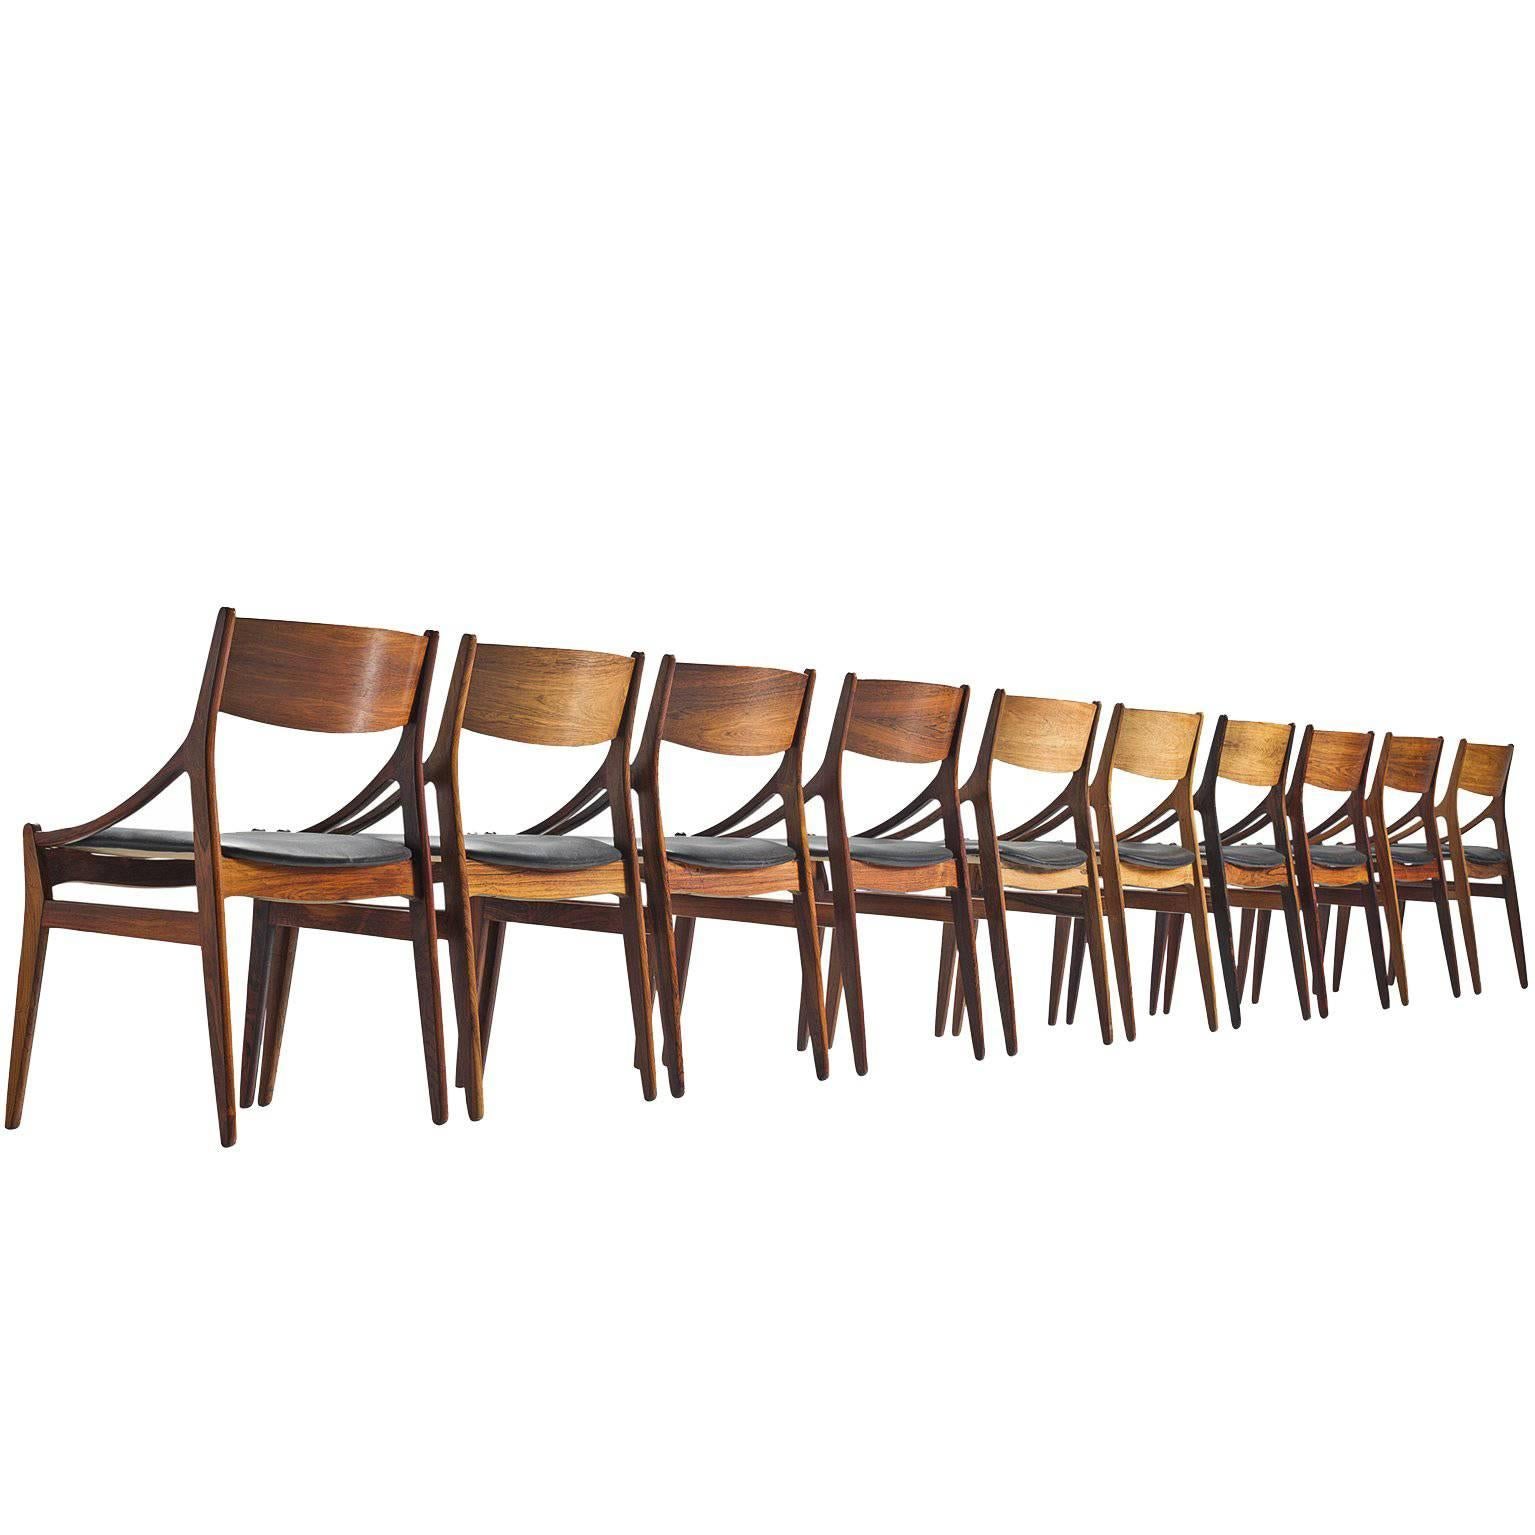 Vestervig Erikson Ten Dining Chairs in Leather and Wood